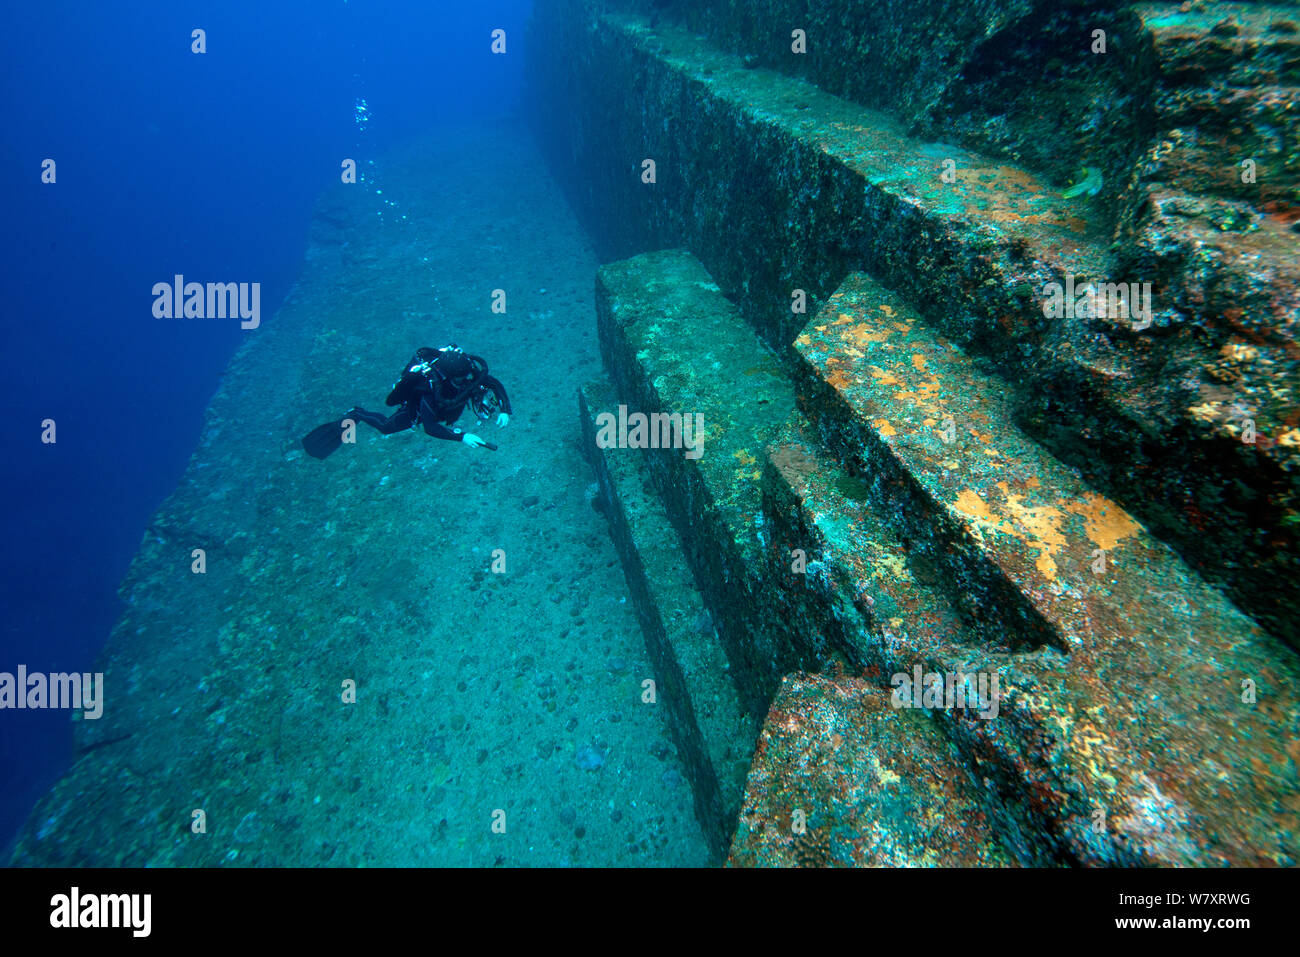 Diver examining the sandstone structure of the Yonaguni undersea monument, Yonaguni, East China Sea, Japan. February 2014. Stock Photo